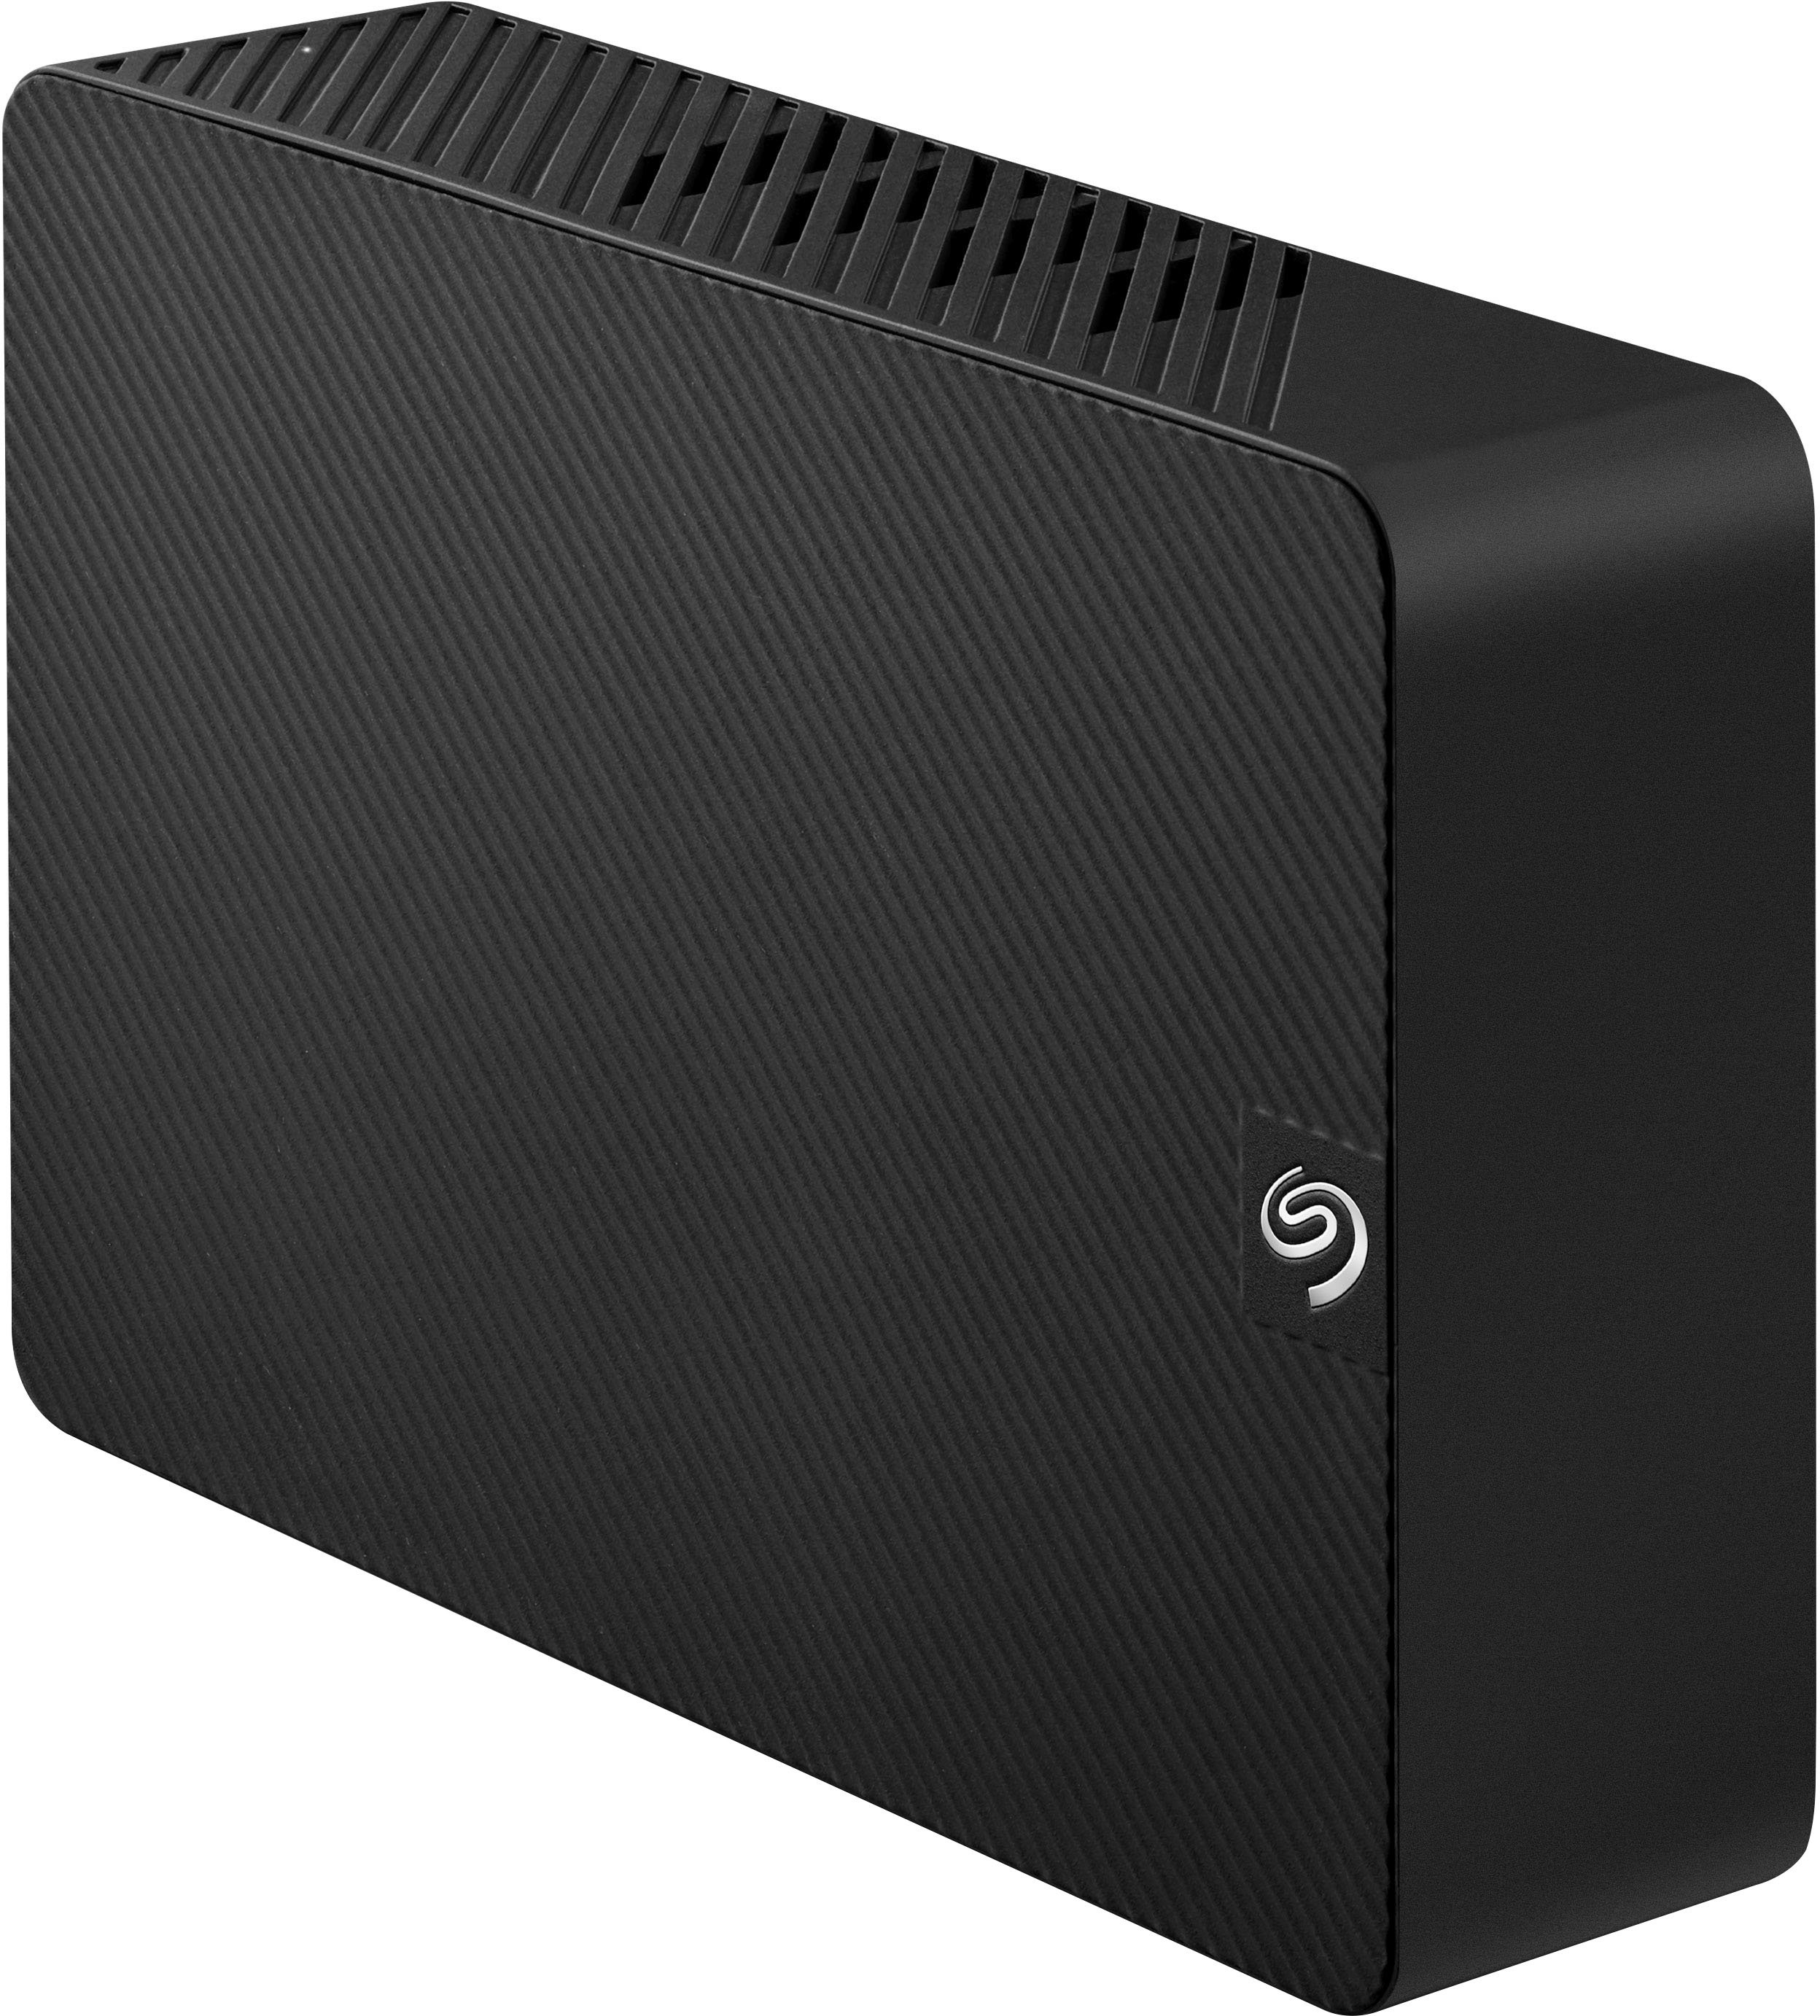 Seagate Expansion 8TB External USB 3.0 Desktop Hard Drive with